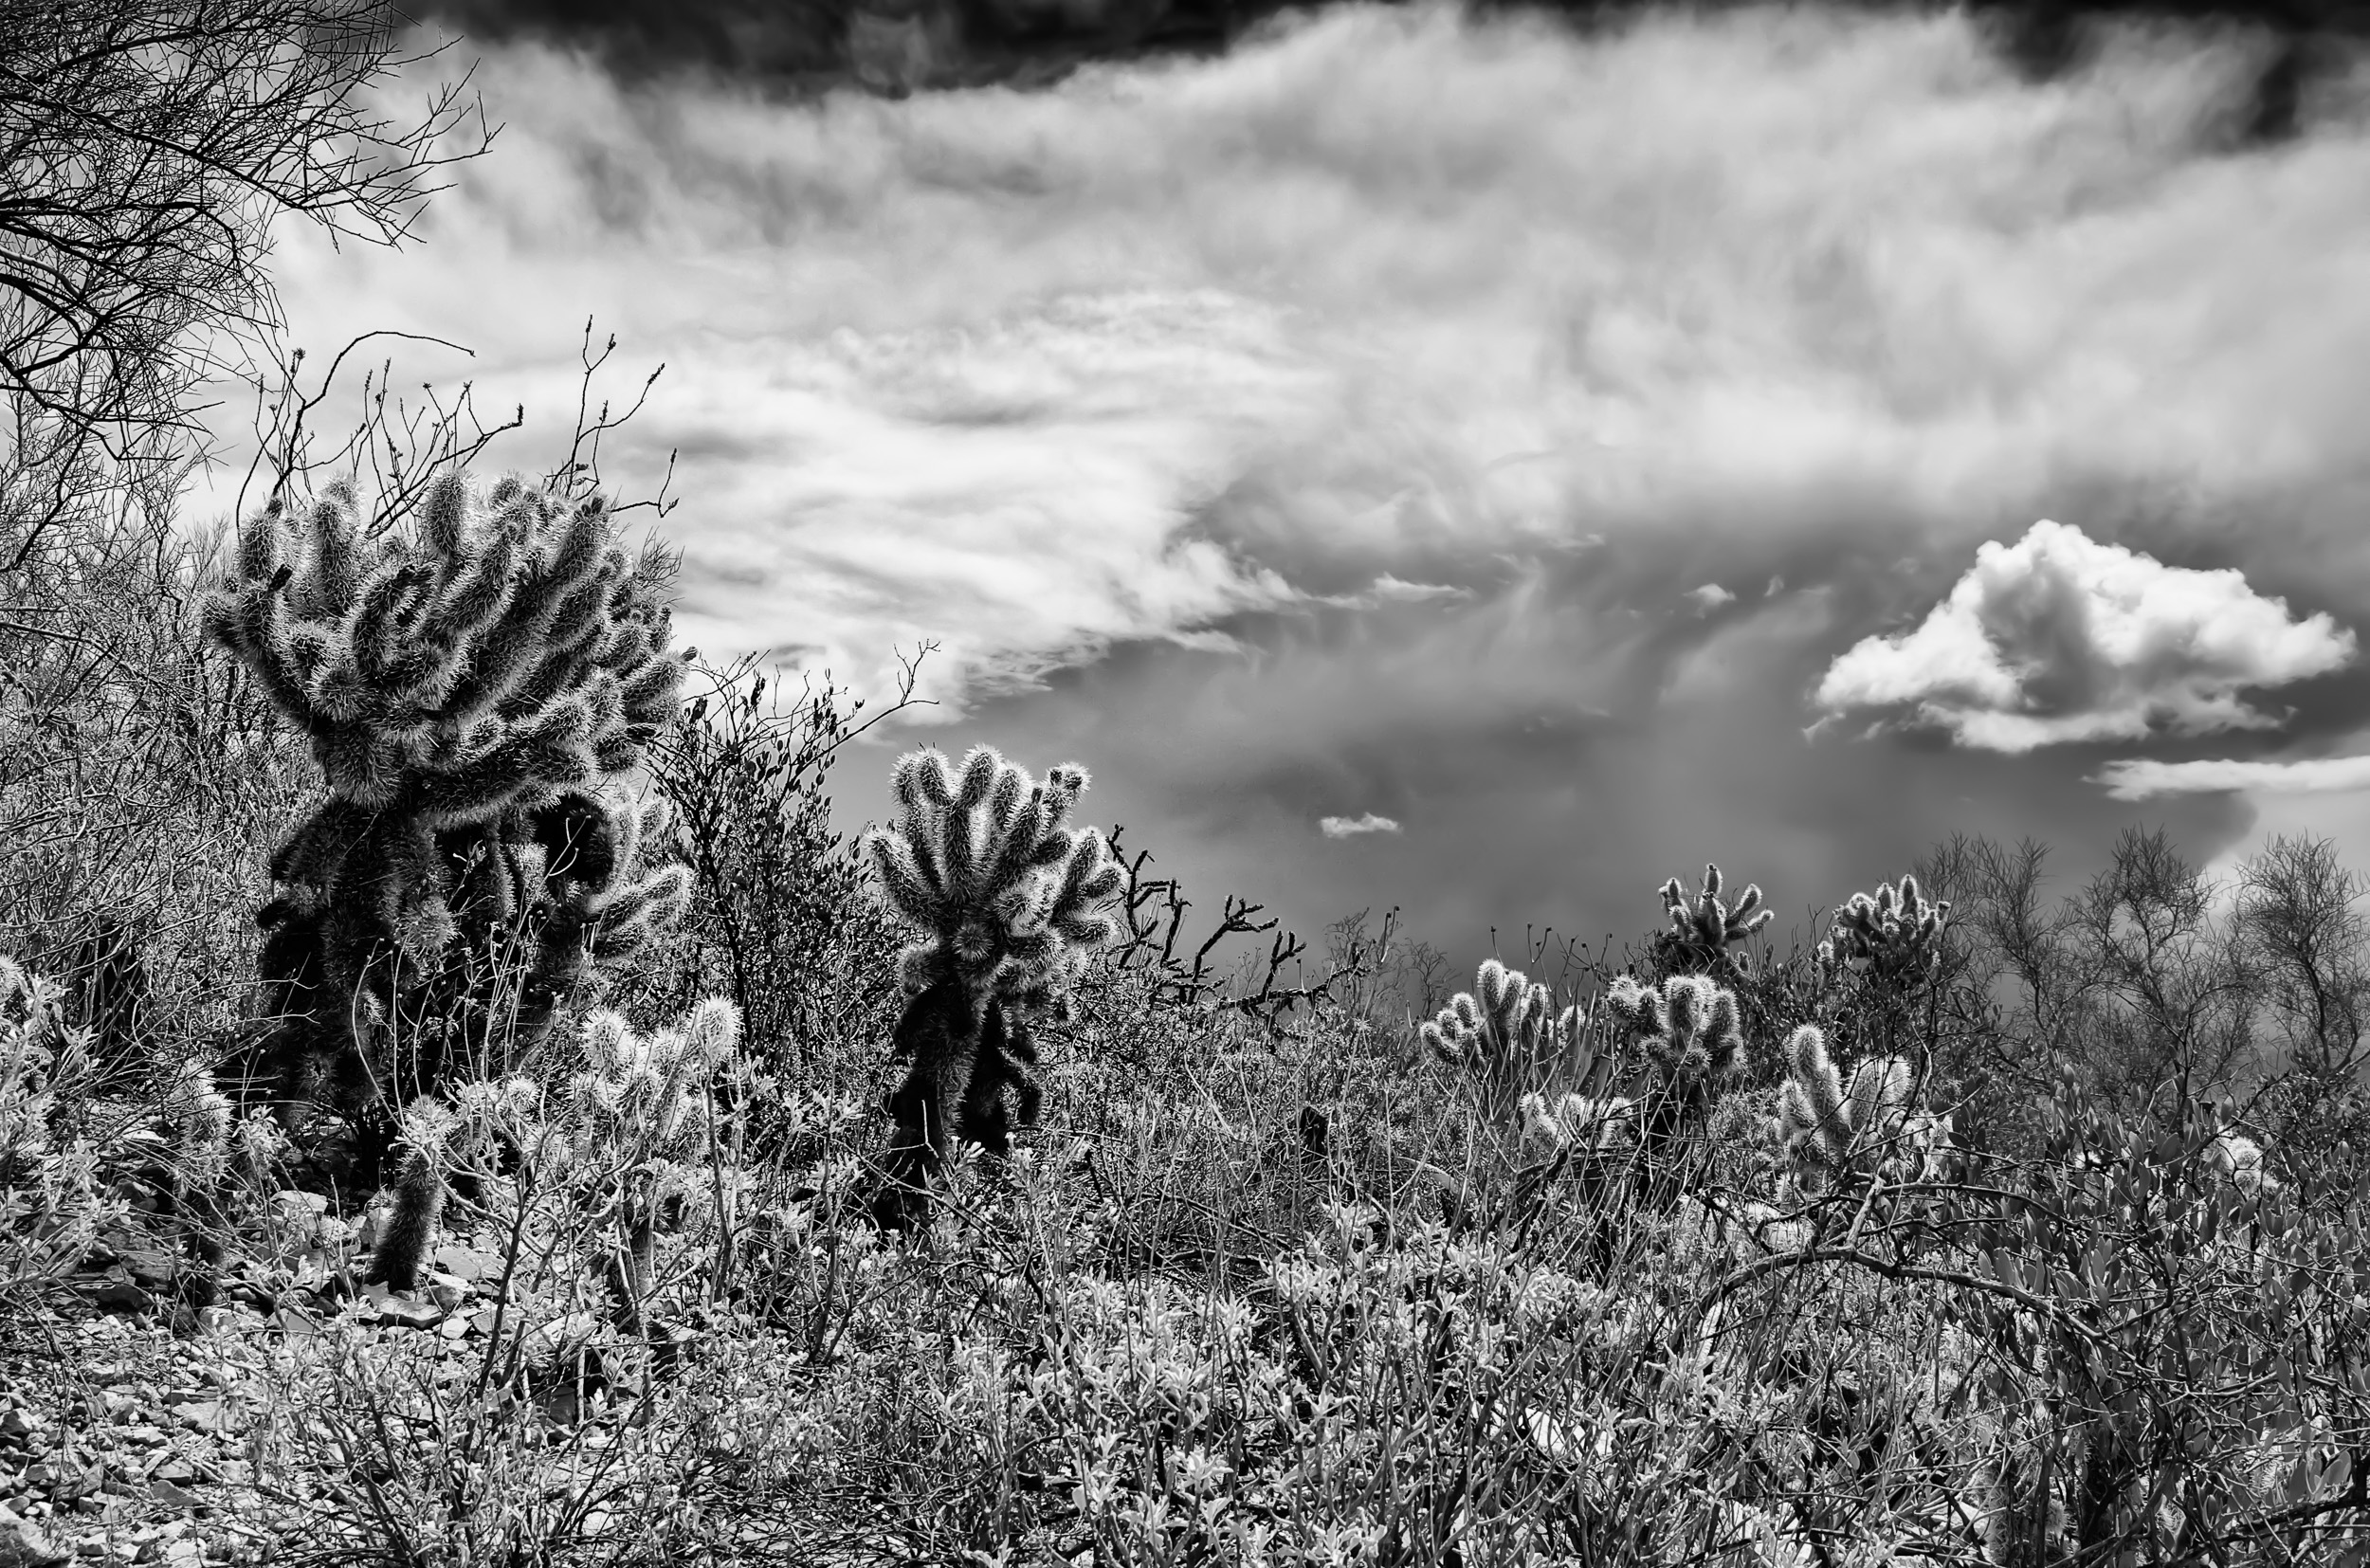 Desert Plants and Approaching Storm